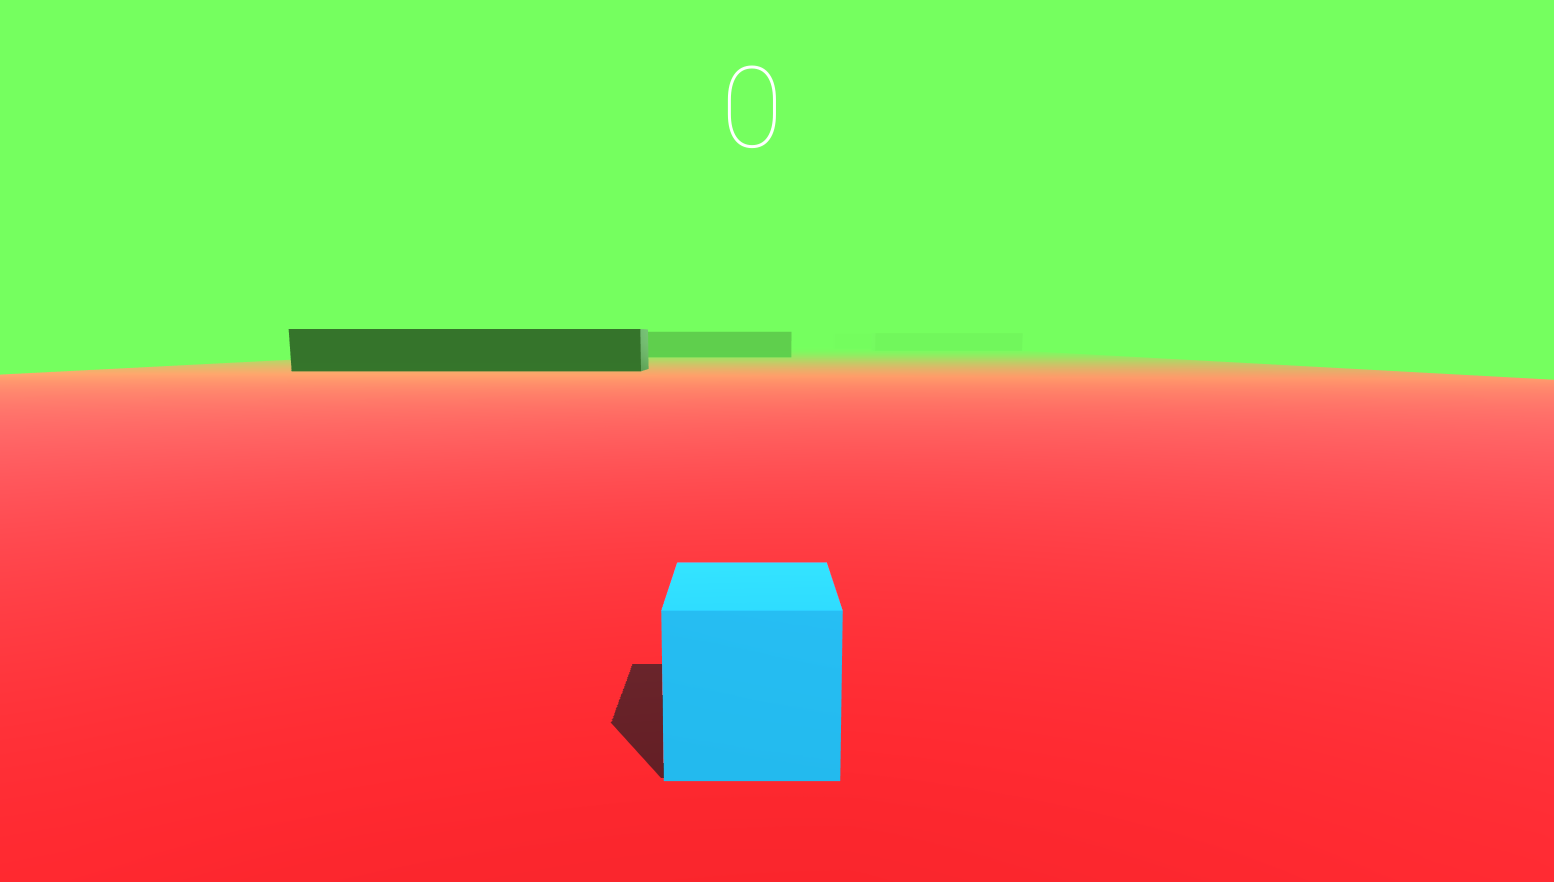 GitHub - LordLean/Dodge-the-Blocks: Cube runner game made in Unity - C#